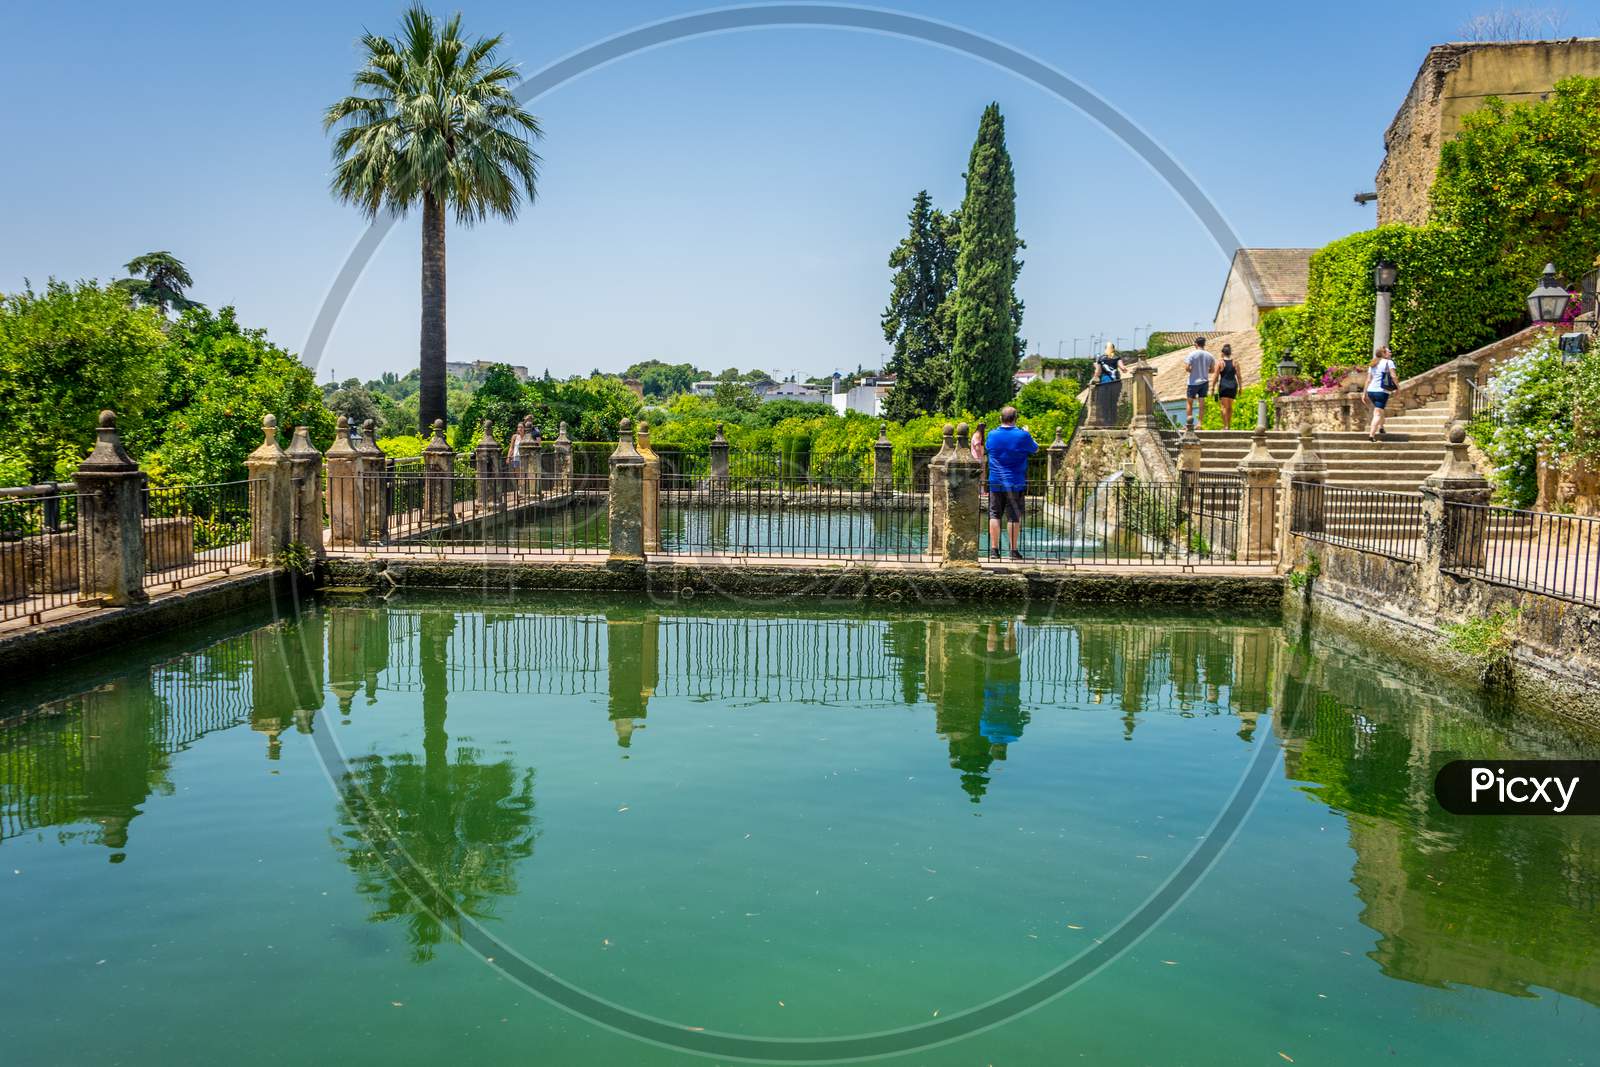 Reflections On A Pond At The Alcazar De Los Reyes Cristianos Castle In Cordoba, Spain, Europe